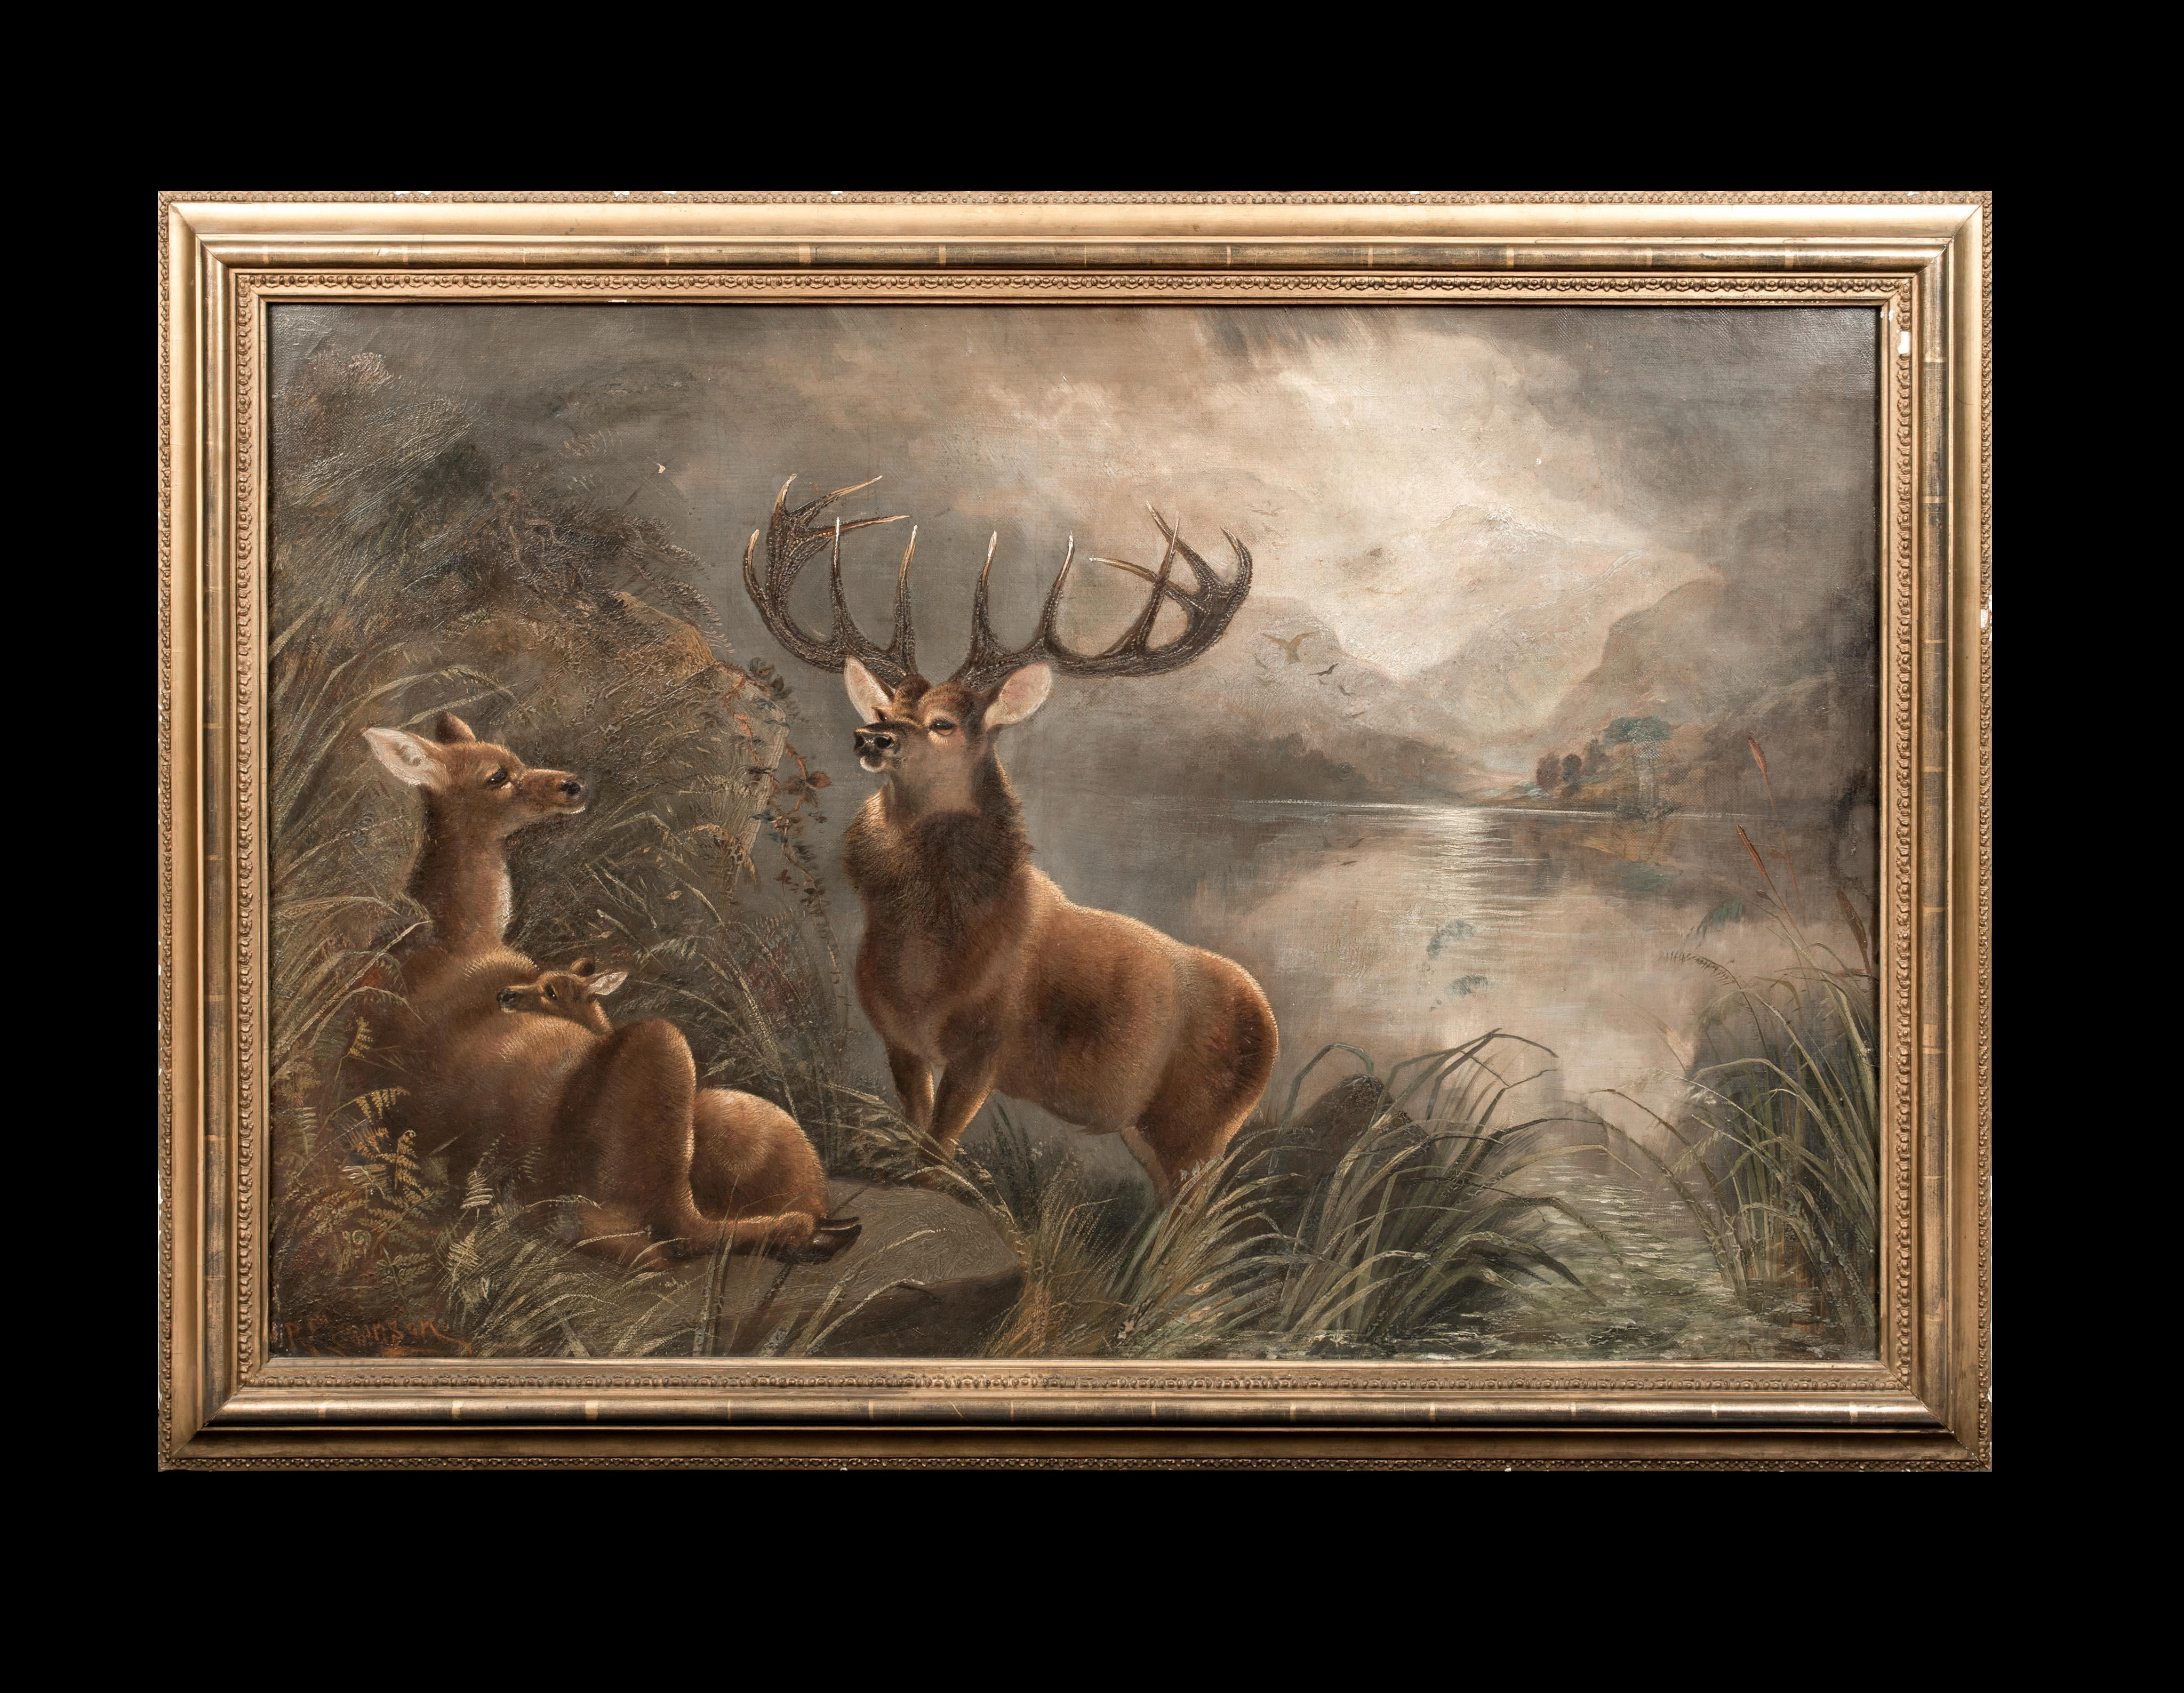 The Monarch of The Glen At Moonlight, 19th Century

by Robert Cleminson (1864-1903)

Large 19th Century Scottish moonlit highland loch landscape of a stag, doe and fawn, oil on canvas by Robert Cleminson. Excellent example of the Scottish animal and